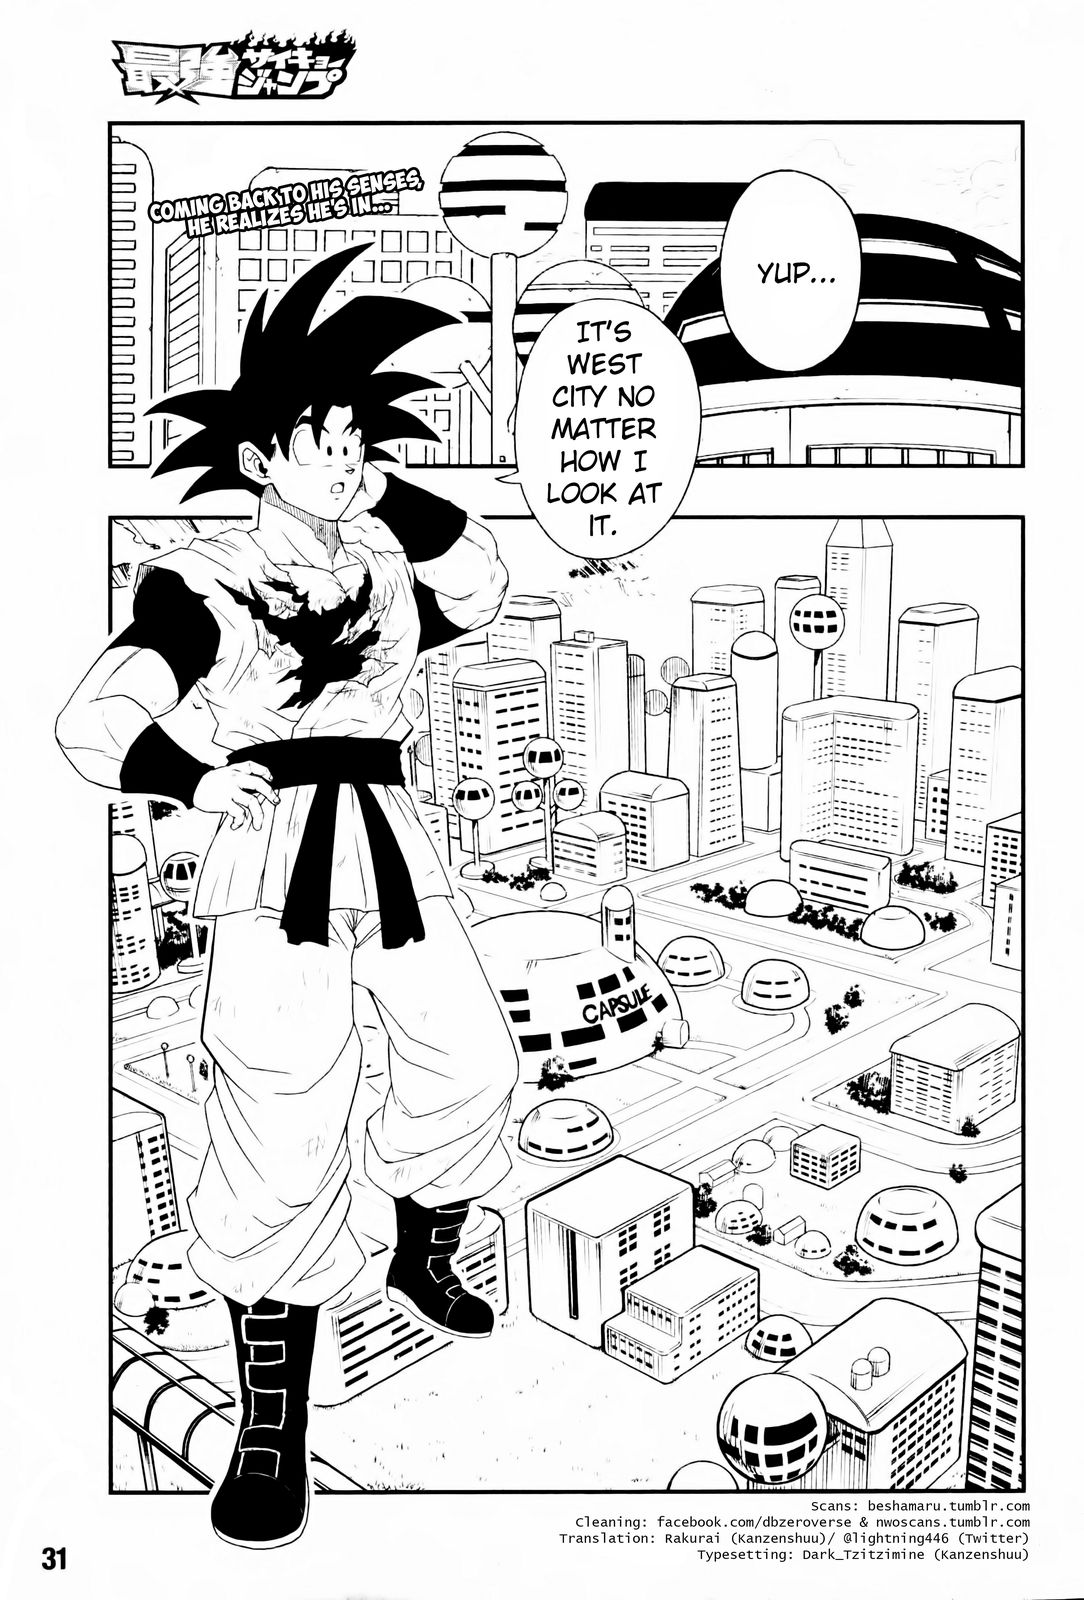 Super Dragon Ball Heroes: Big Bang Mission! Vol.2 Chapter 7: A Mysterious Warrior Appears In Front Of Goku!! This Appearance...who Could It Be? - Picture 2